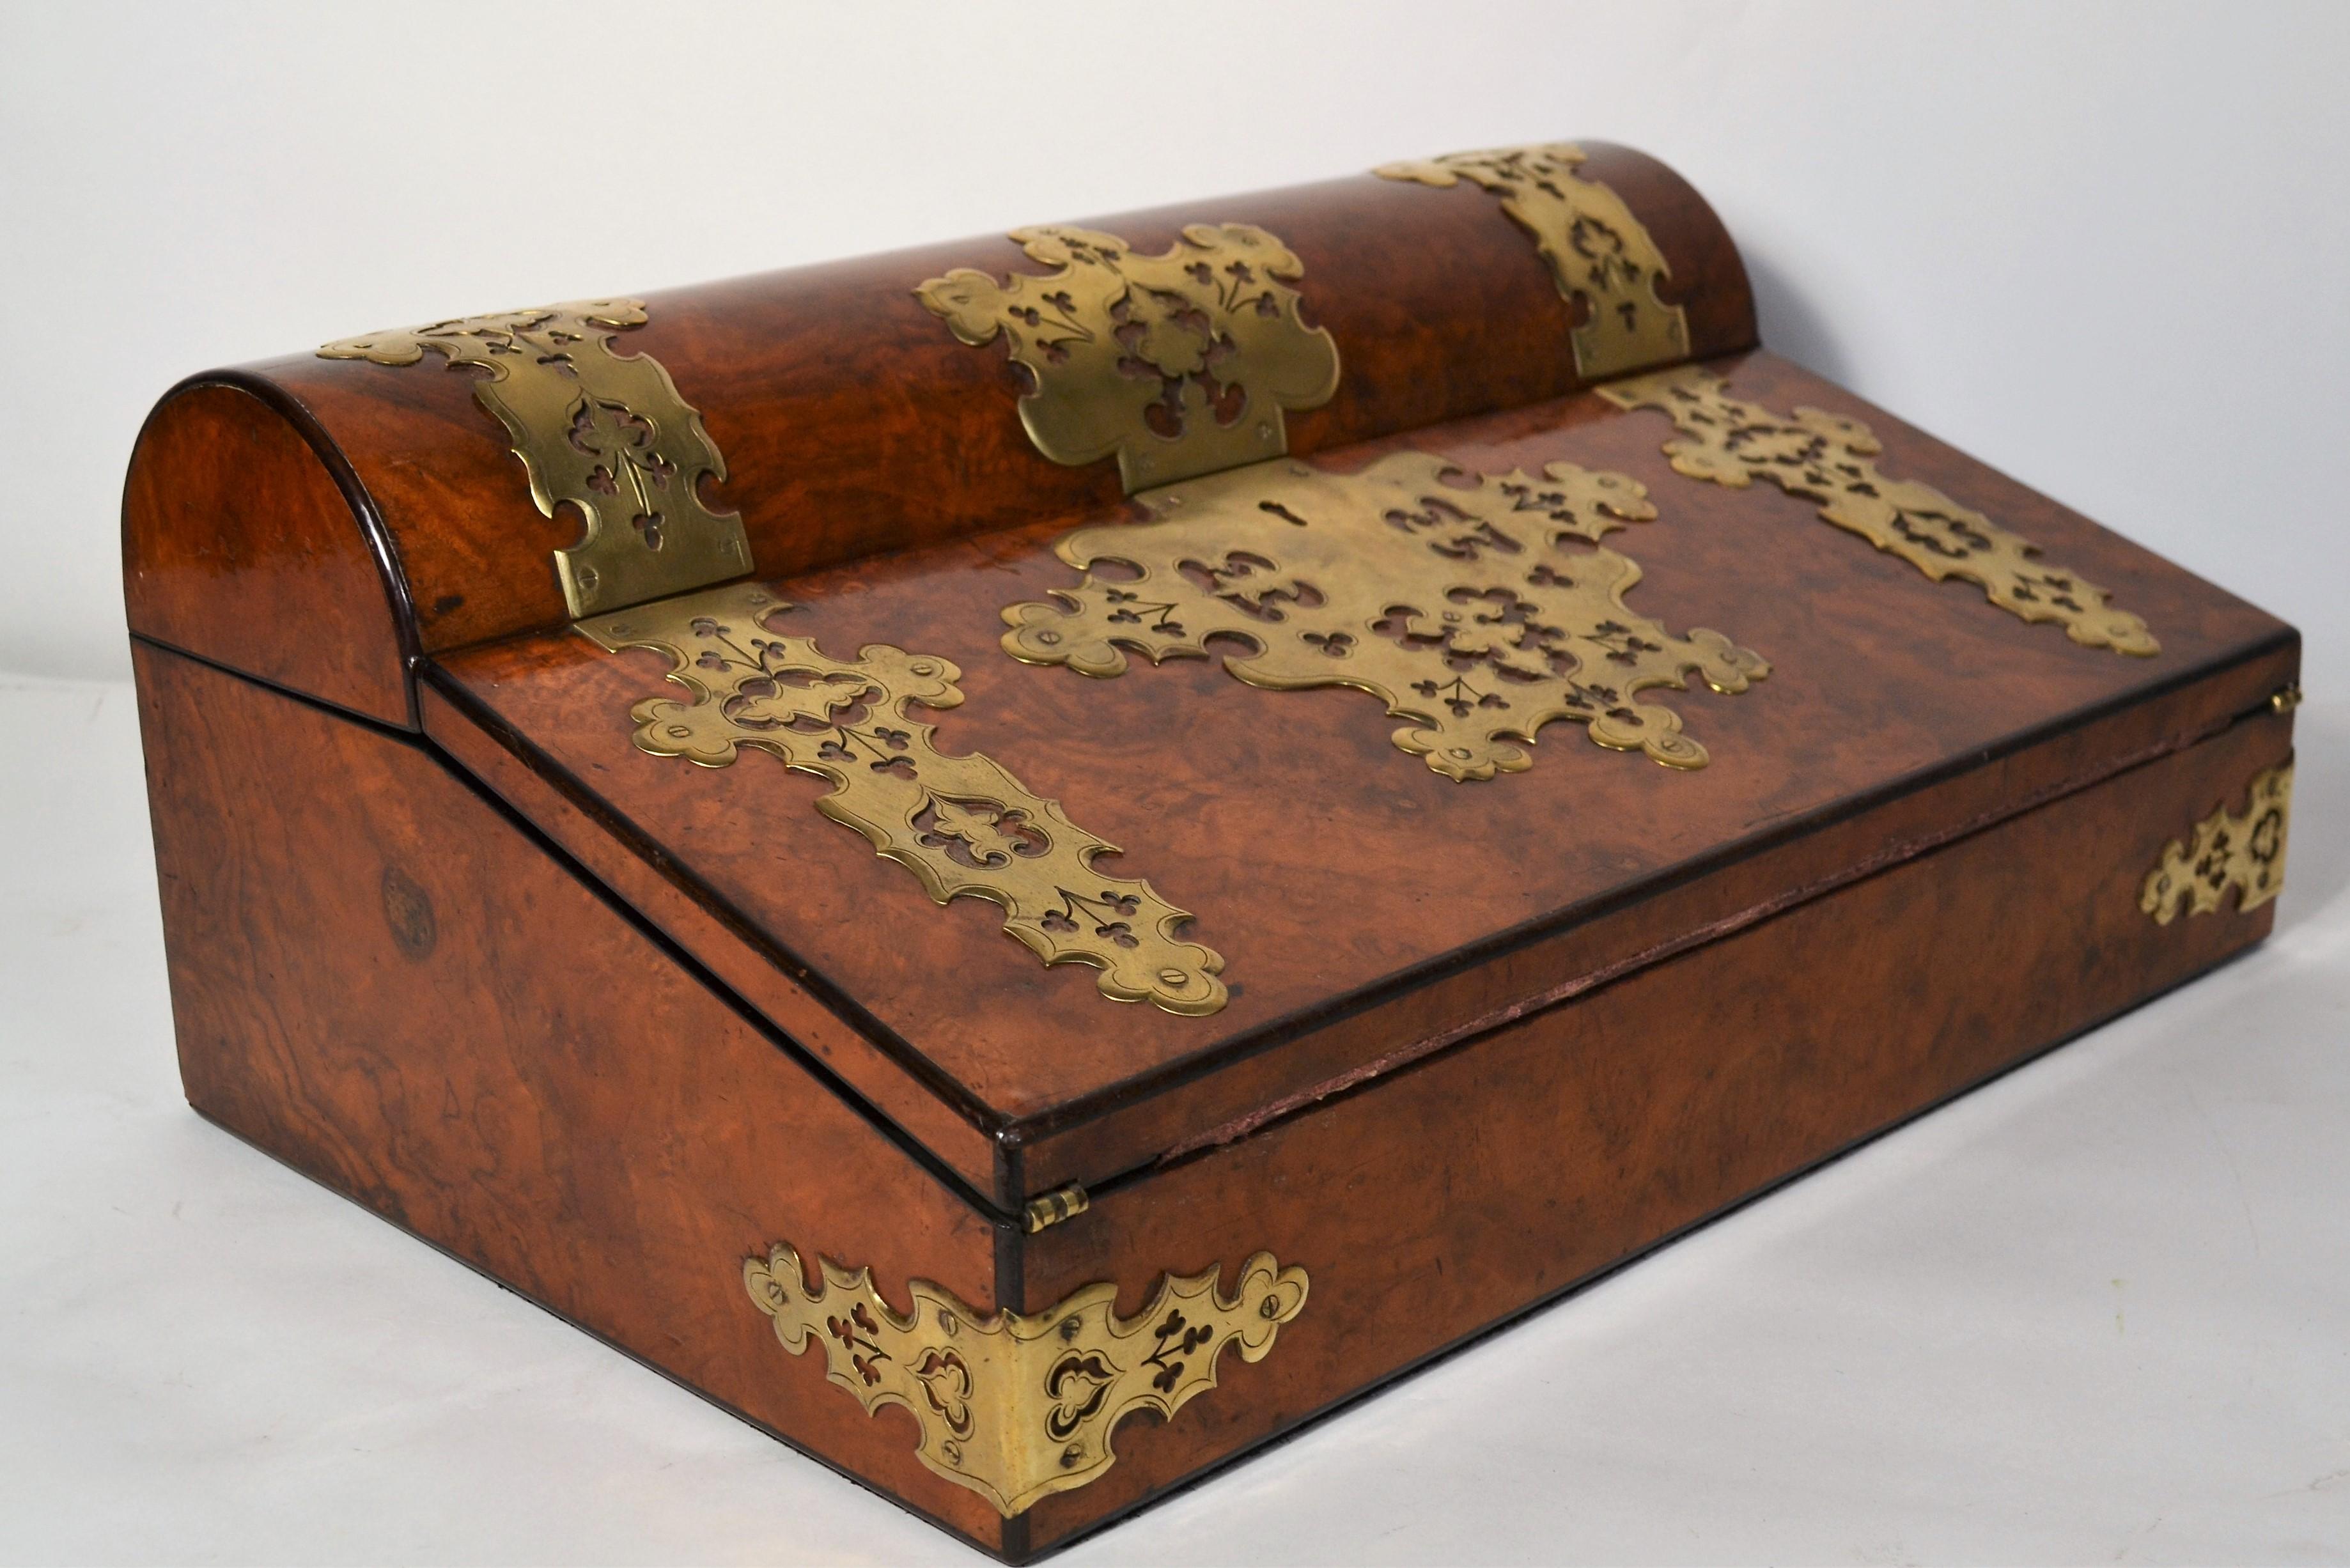 This burl lap desk is in very good shape considering its age.  The nice blood red leather inside is in fine form, with the graceful fleur de lis elements at each corner, as is the leather pull to expose the storage area.  There is a key for this lap